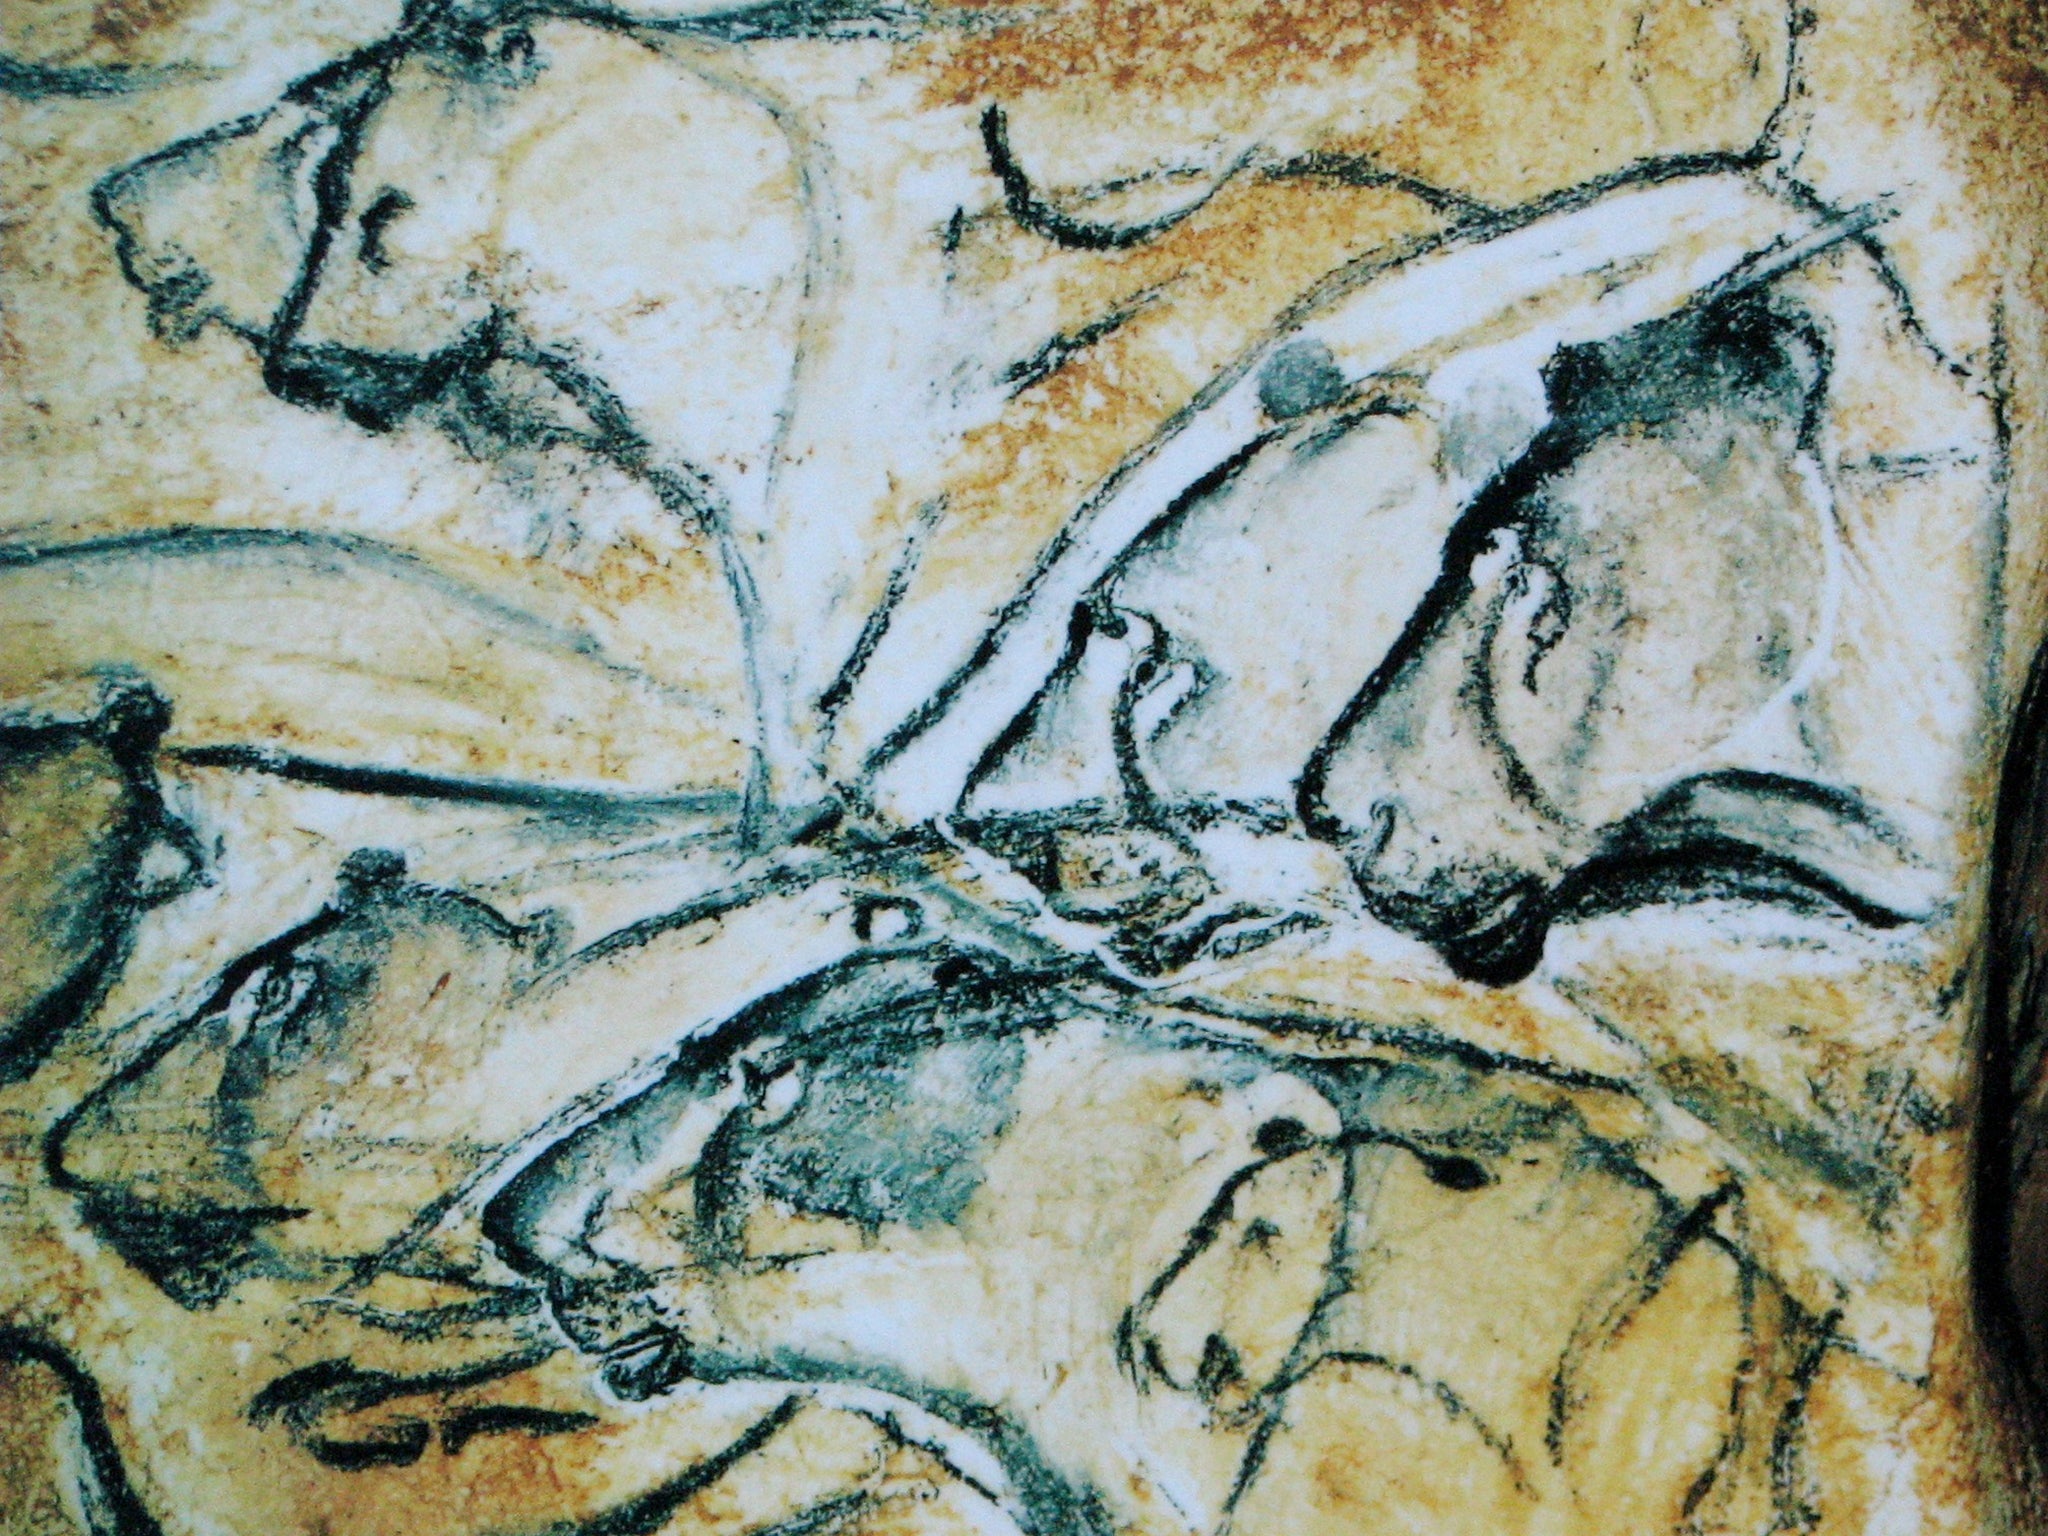 Cave painting of lions drawn on the walls of the Chauvet Pont d'Arc Cave in the south of France. It was painted about 30,000 years ago